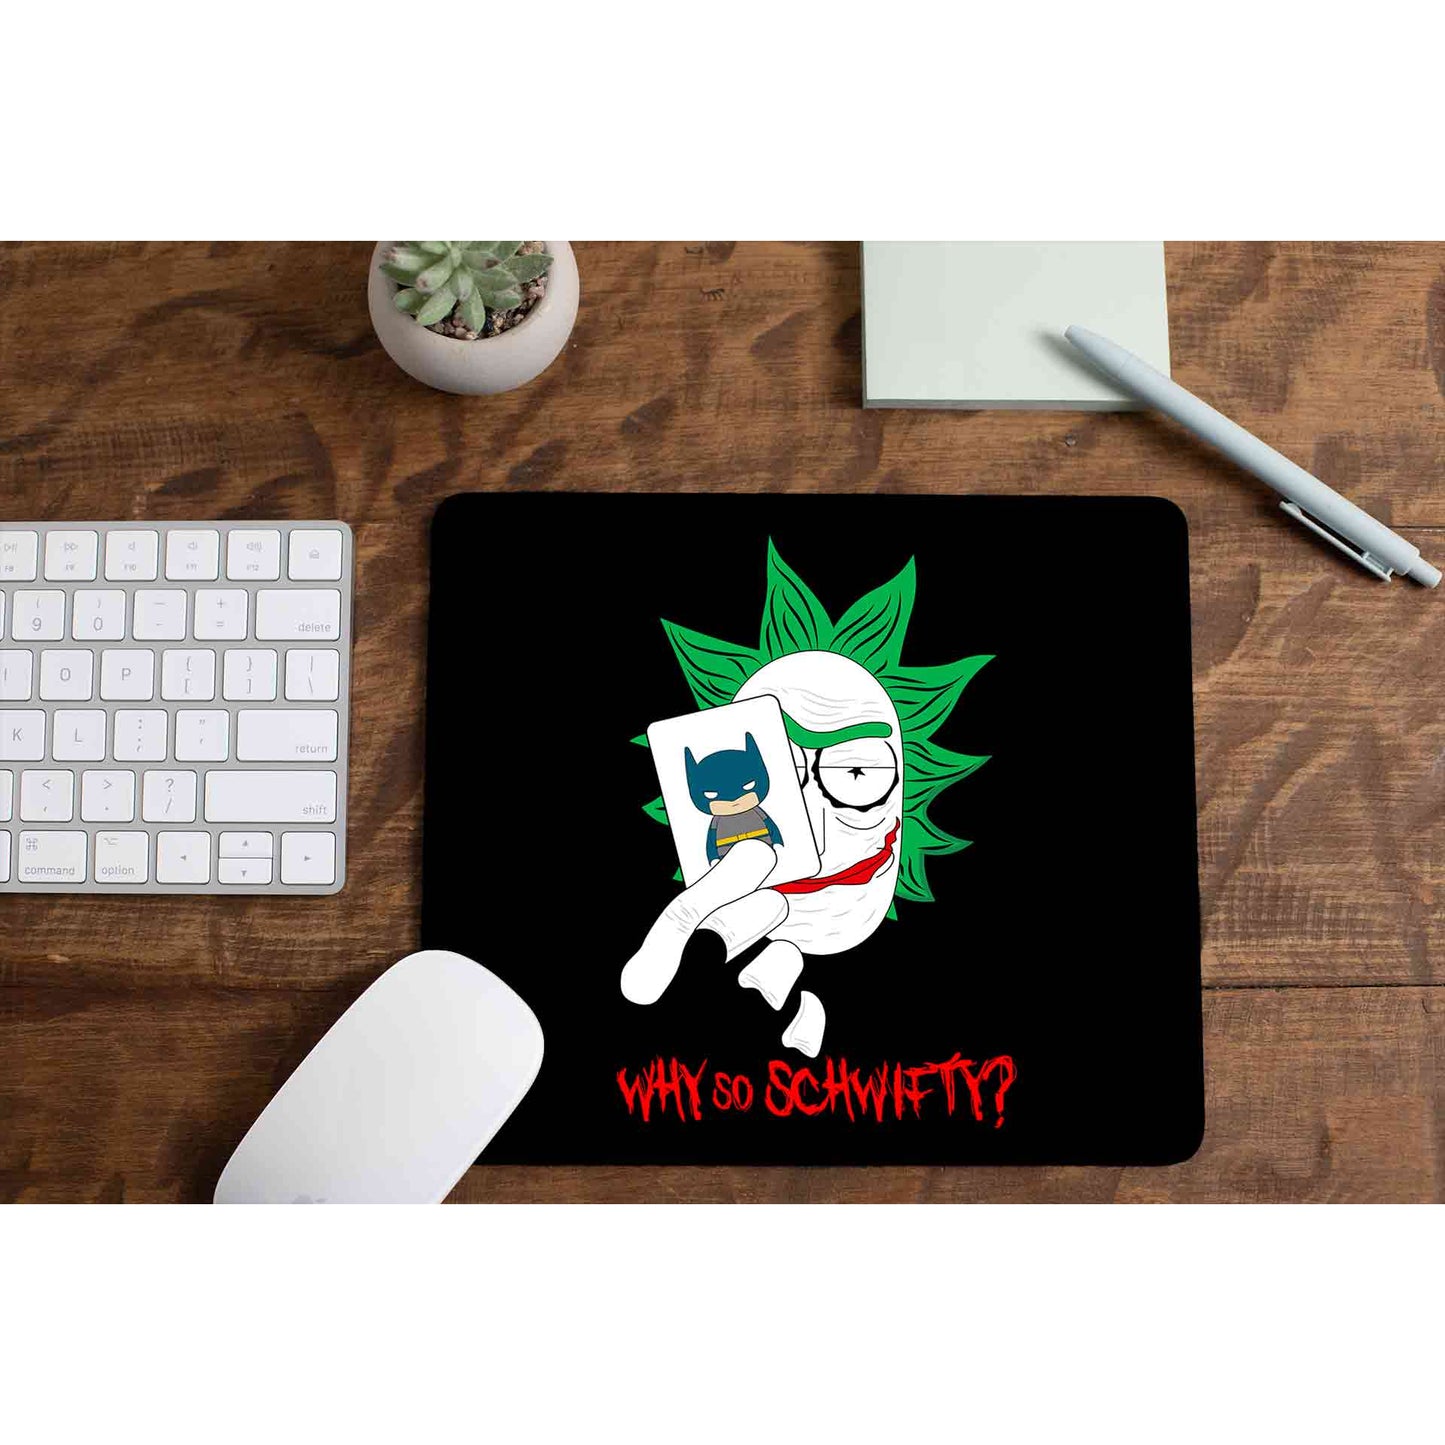 rick and morty joker mousepad logitech large anime buy online india the banyan tee tbt men women girls boys unisex  rick and morty online summer beth mr meeseeks jerry quote vector art clothing accessories merchandise